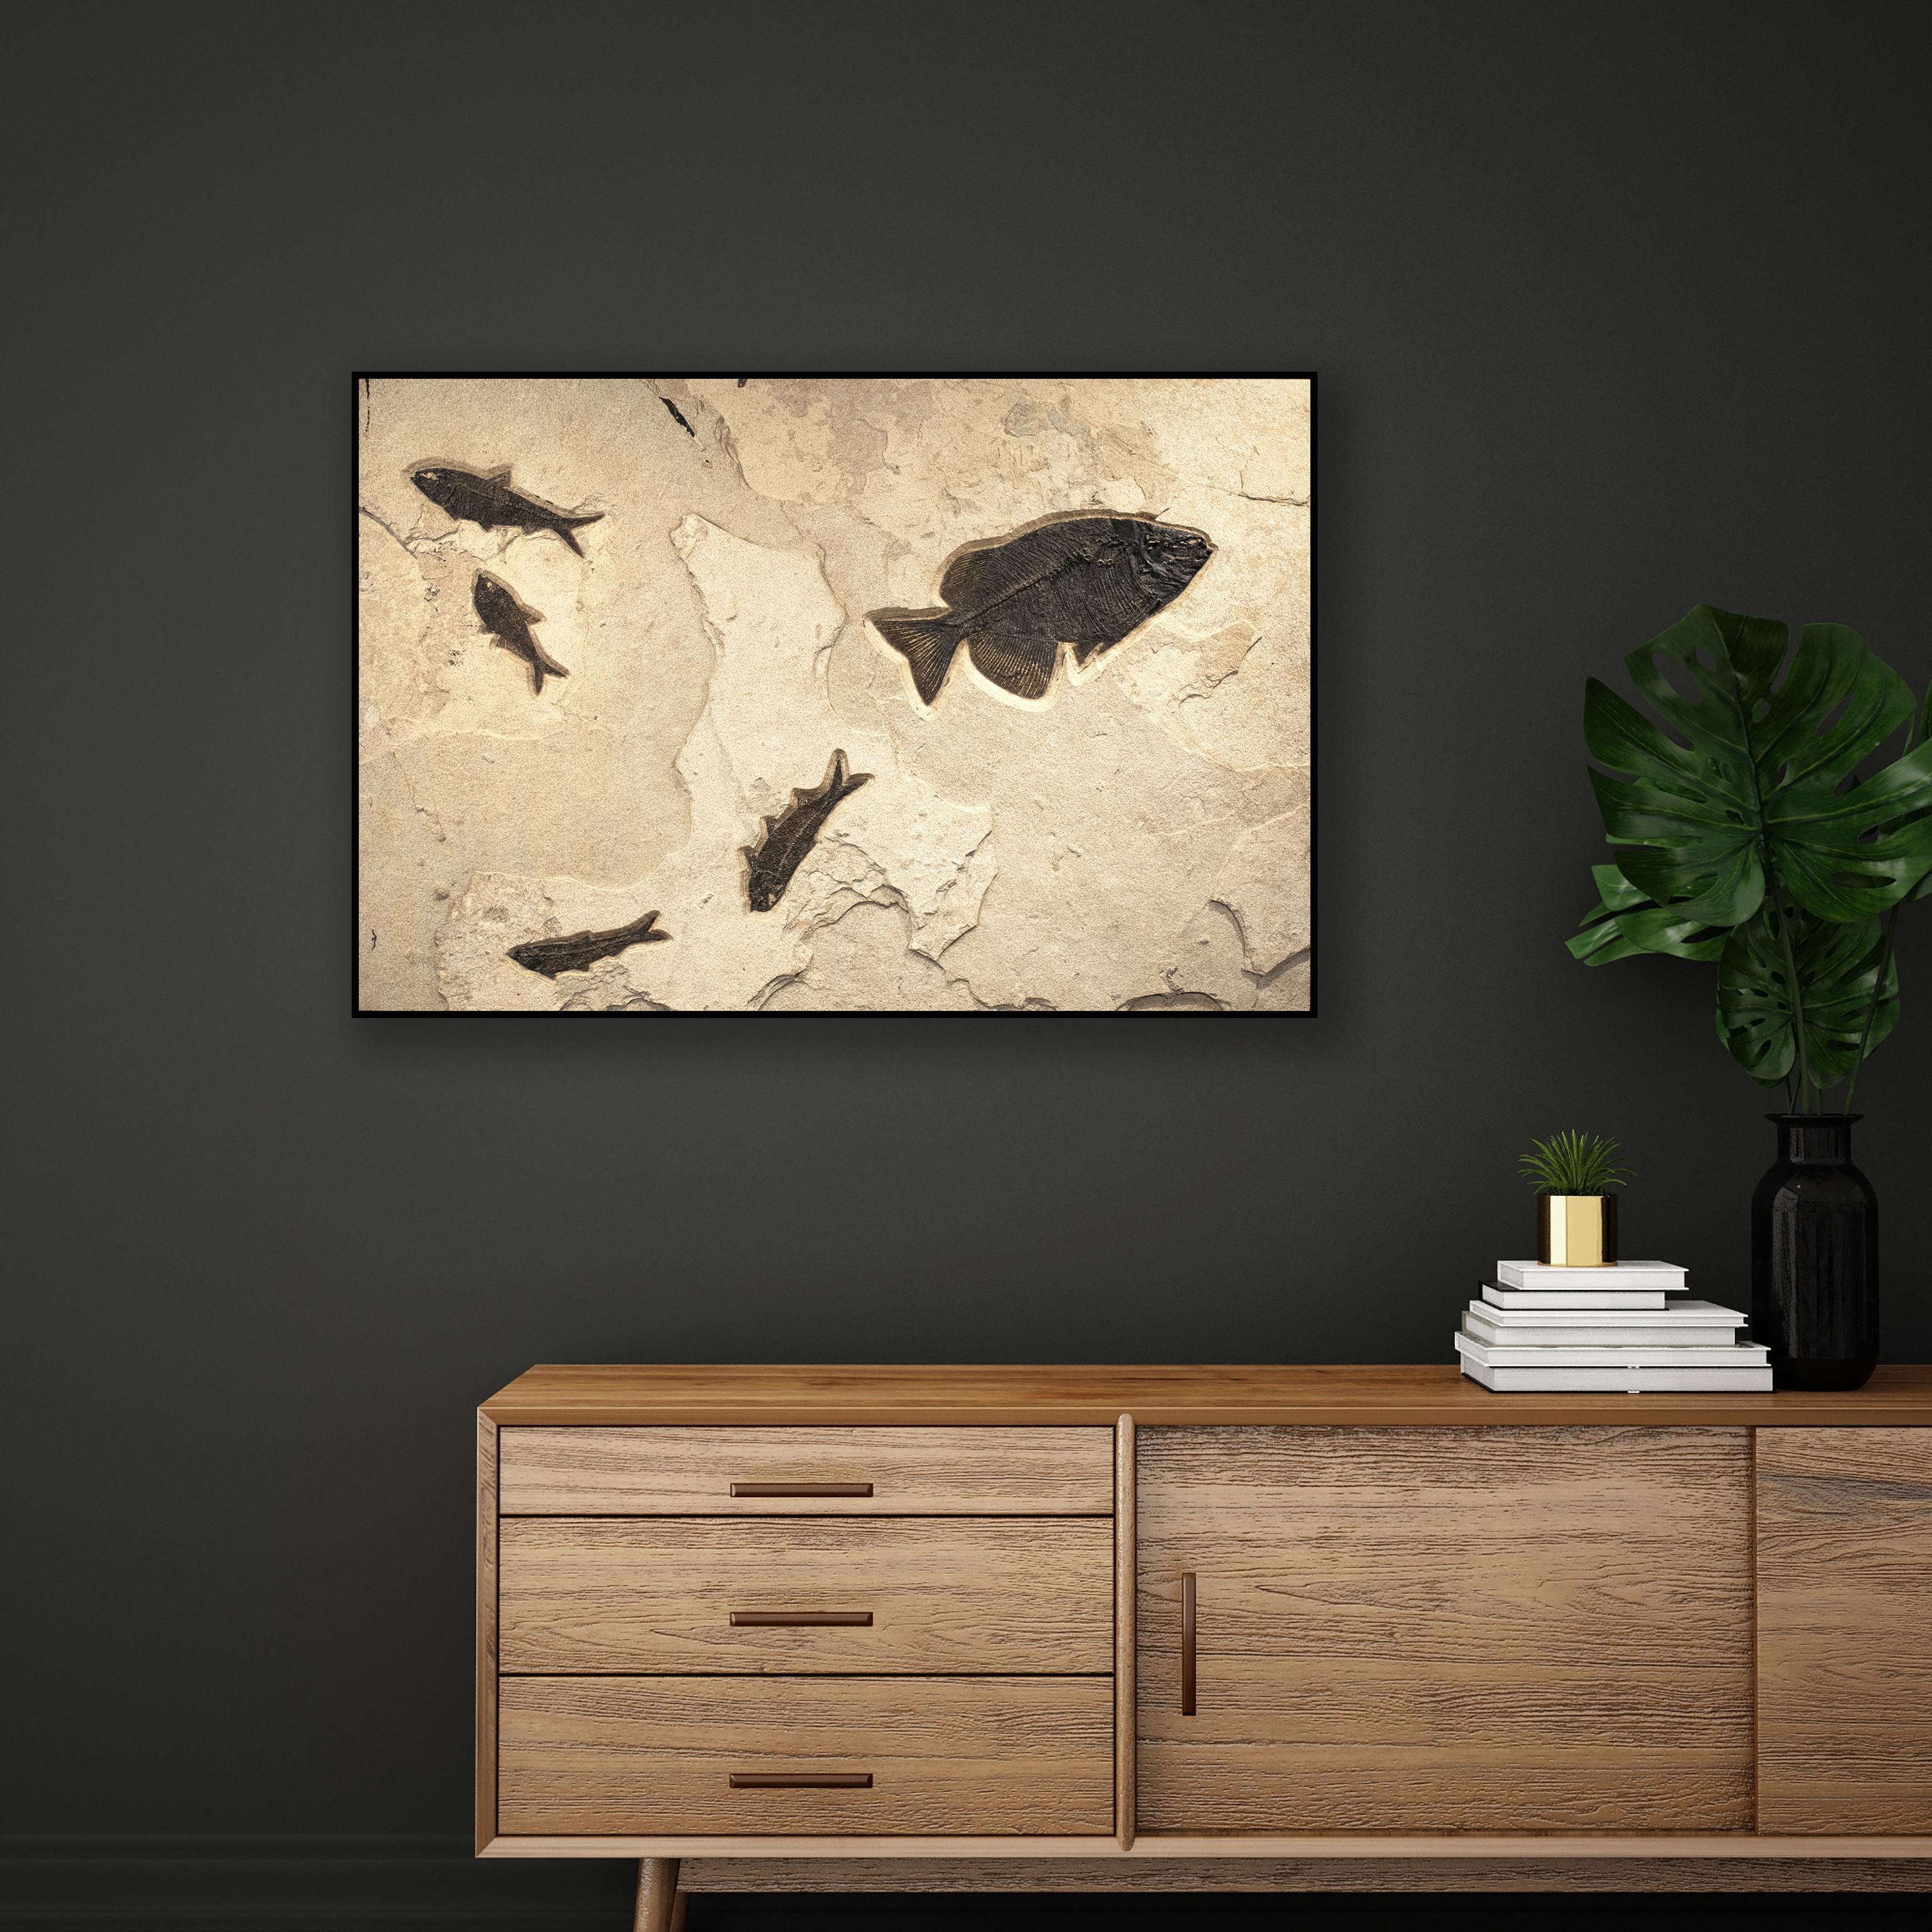 This exquisite fossil mural features a Phareodus testis, a Diplomystus dentatus, and three Knightia eocaena. These fish are all Eocene era fossils dating back about 50 million years. These ancient fish are forever preserved in a textured matrix of